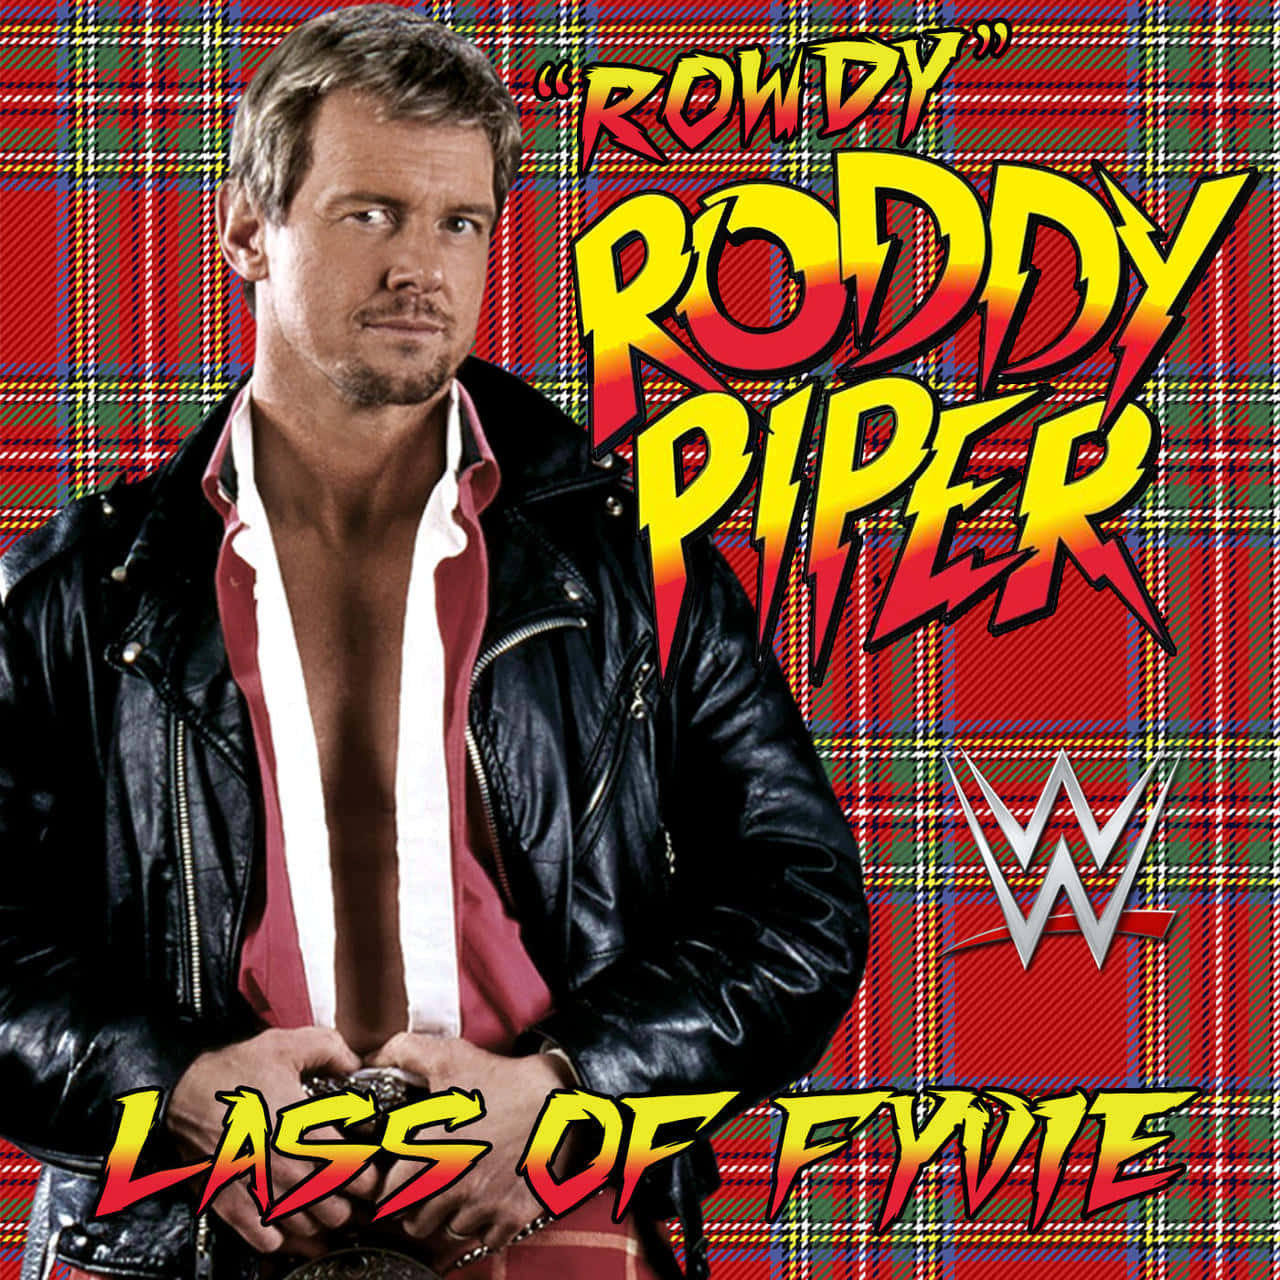 Roddypiper Wwe Lass Of Fyvie Poster Would Be Translated As 